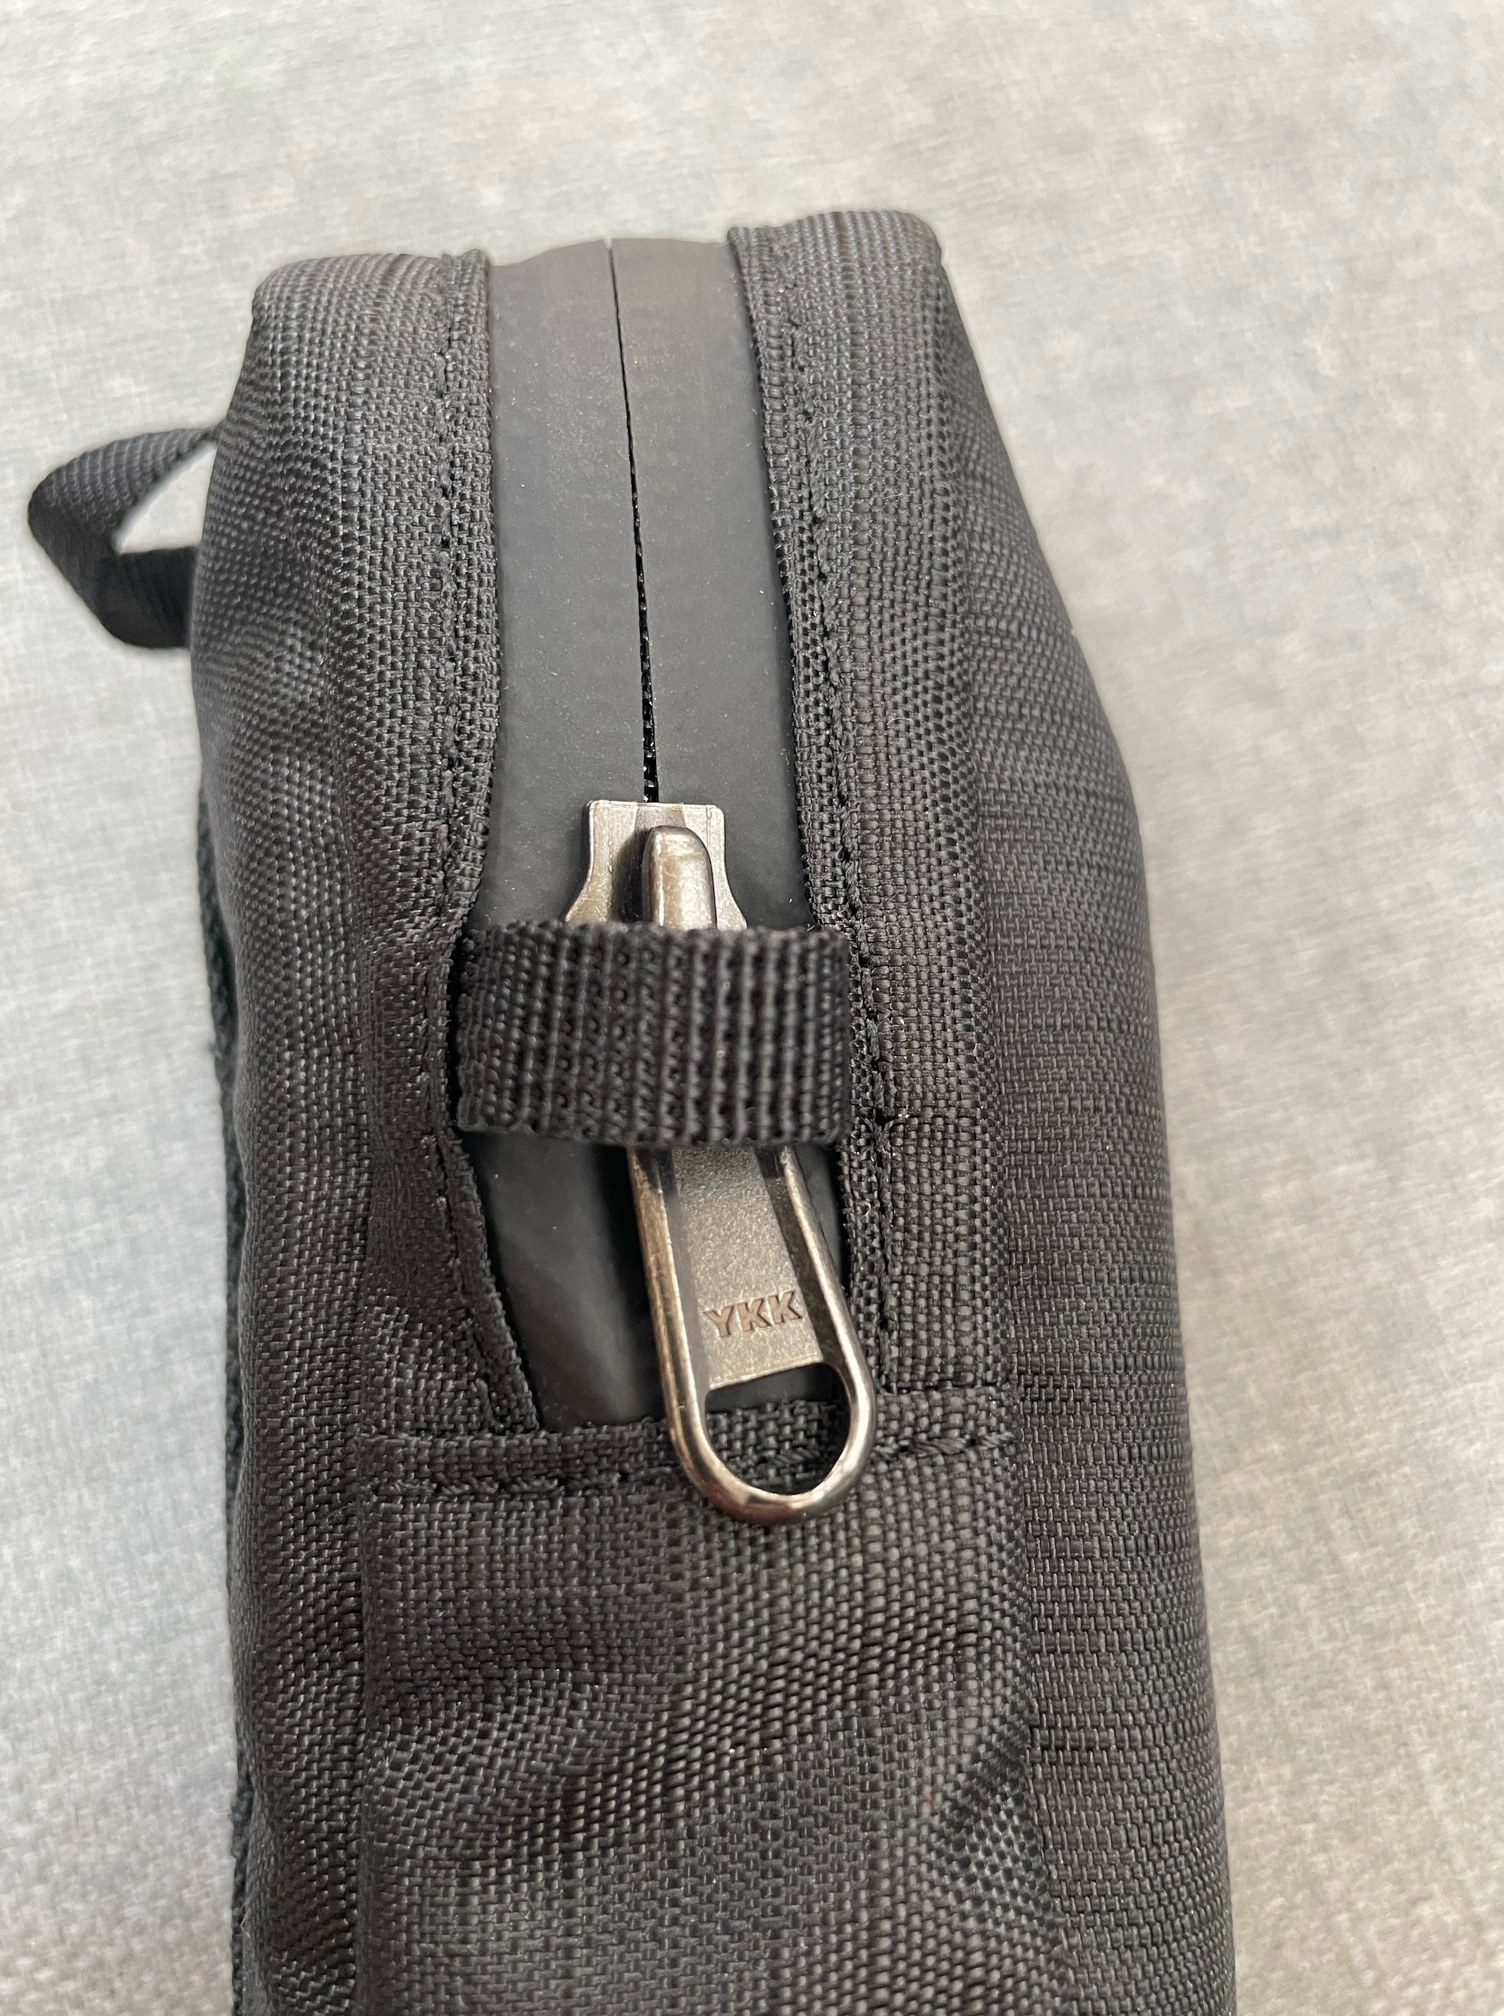 Leatherman Tool Pouch review - A new home for my multi-tools - The ...